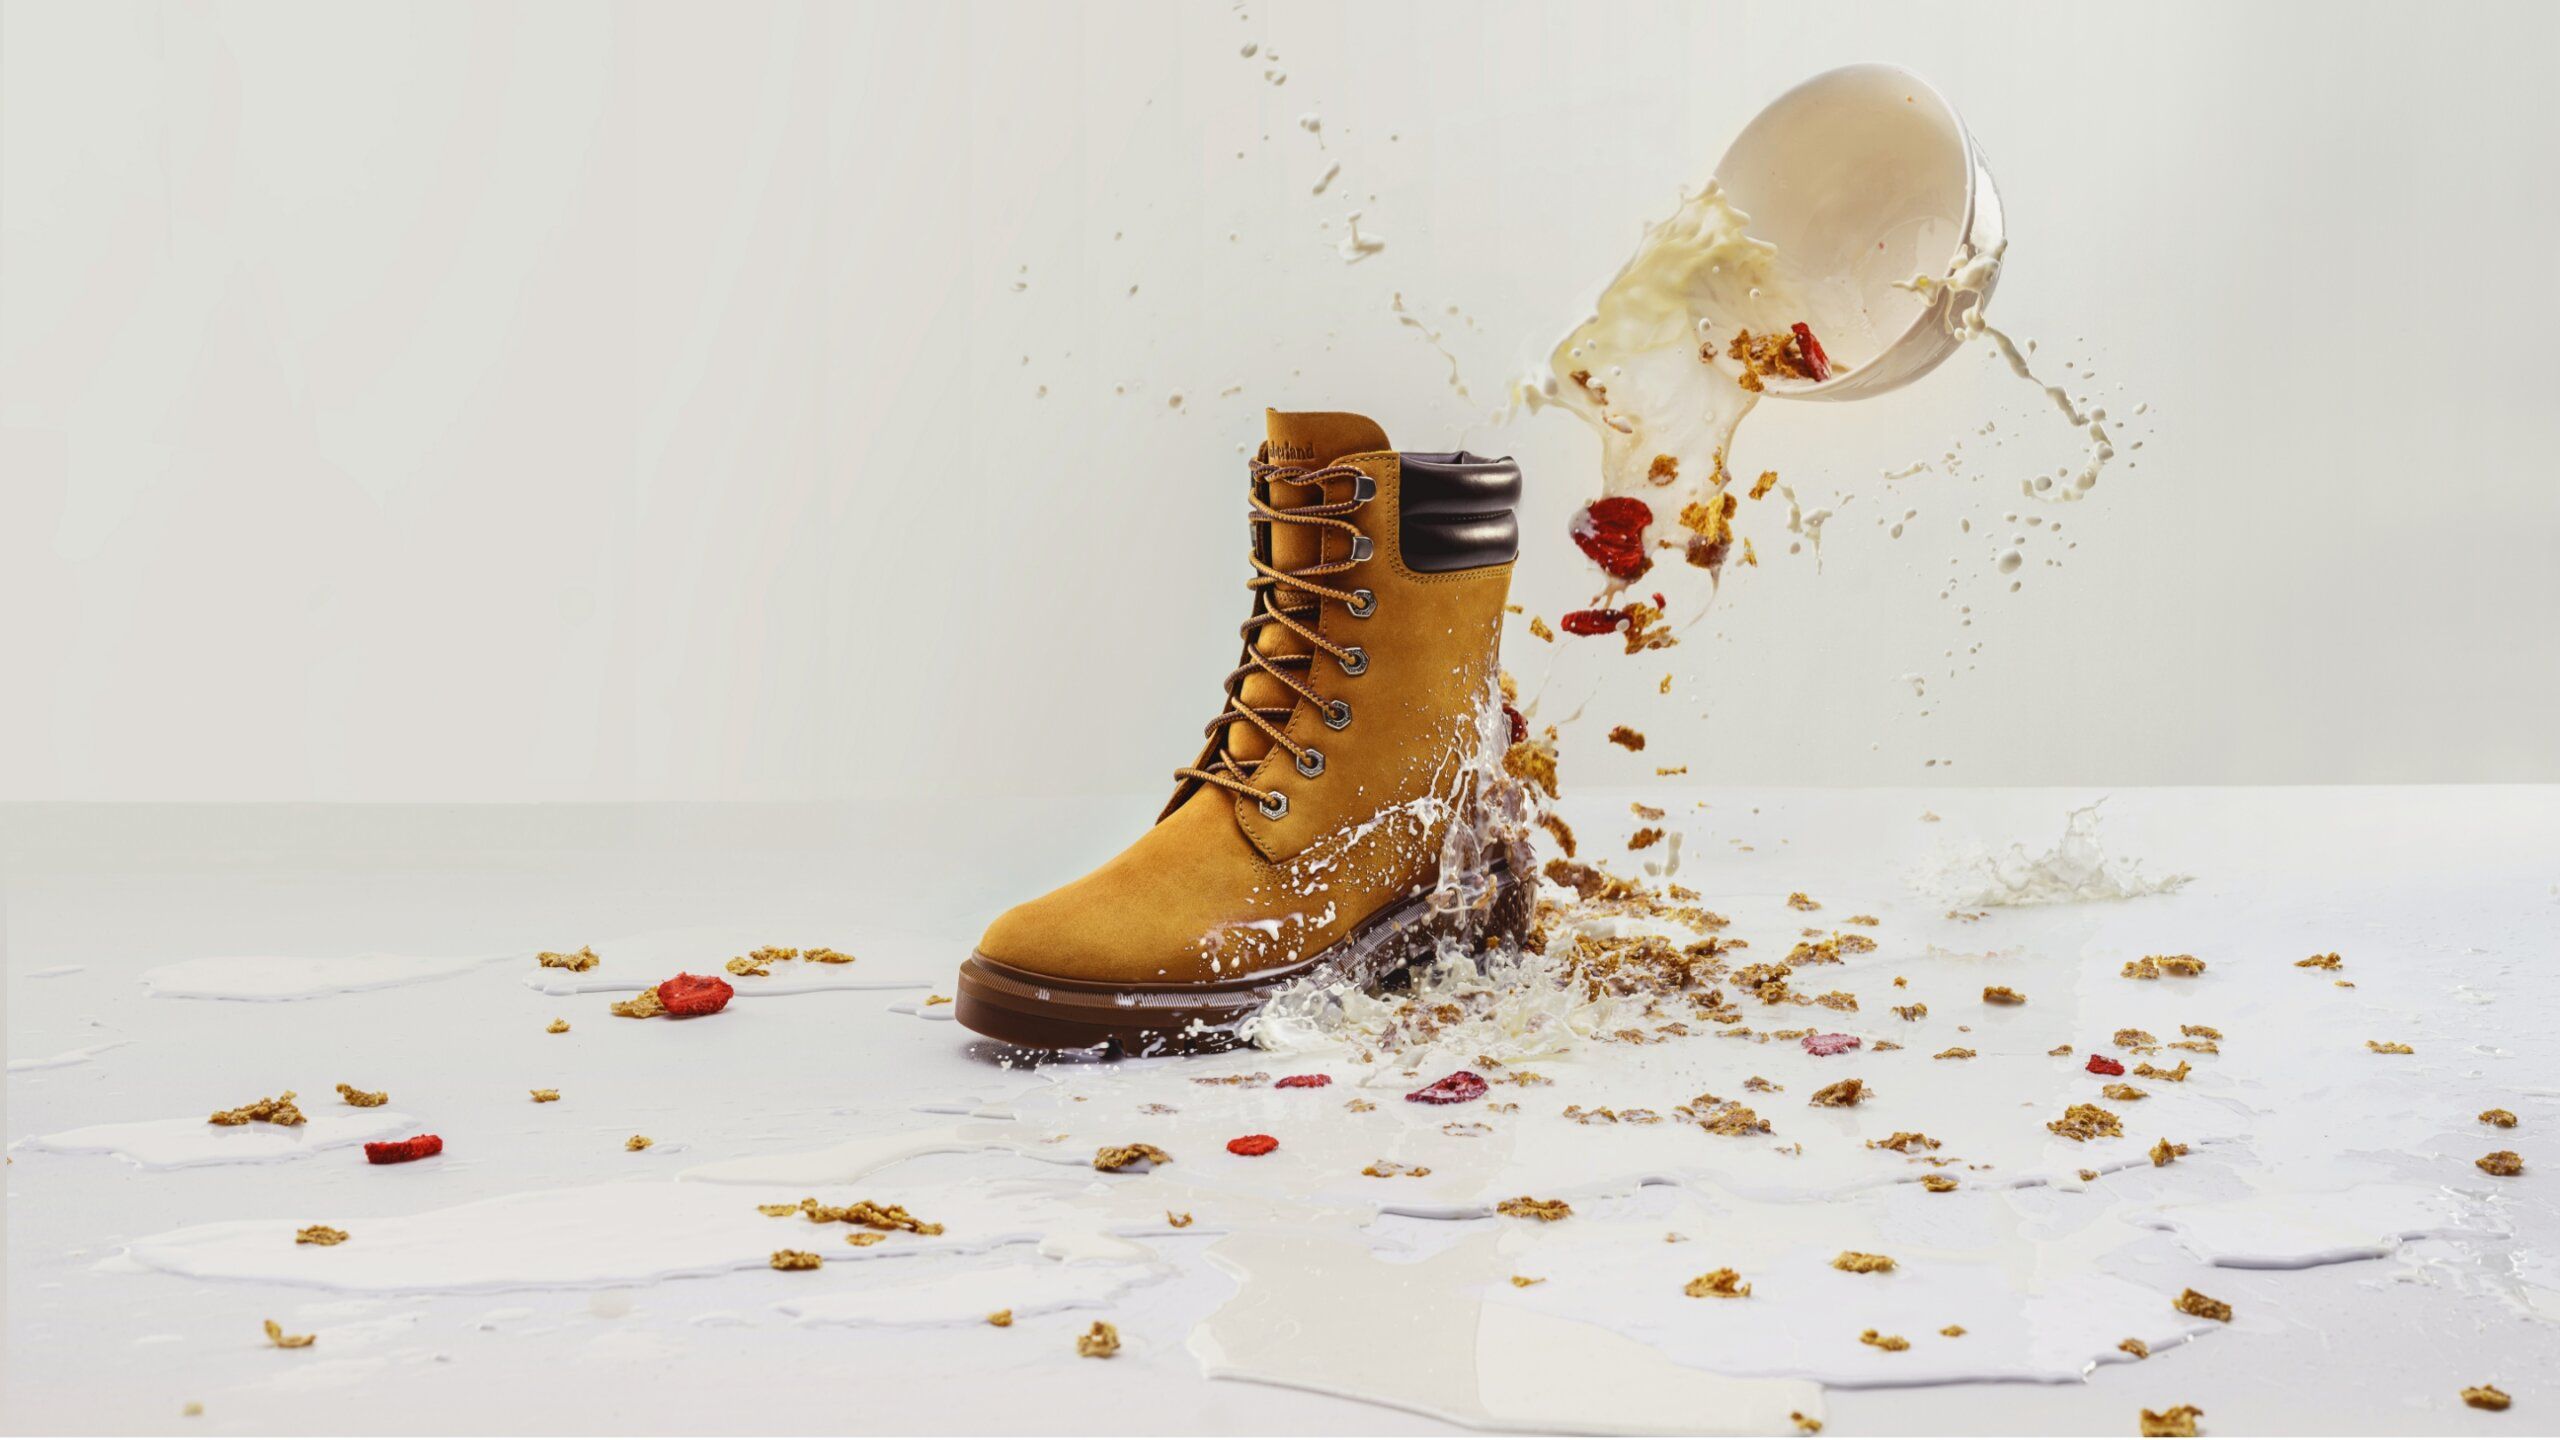 Timberland boot with bowl of cereal falling and spilling over onto boot